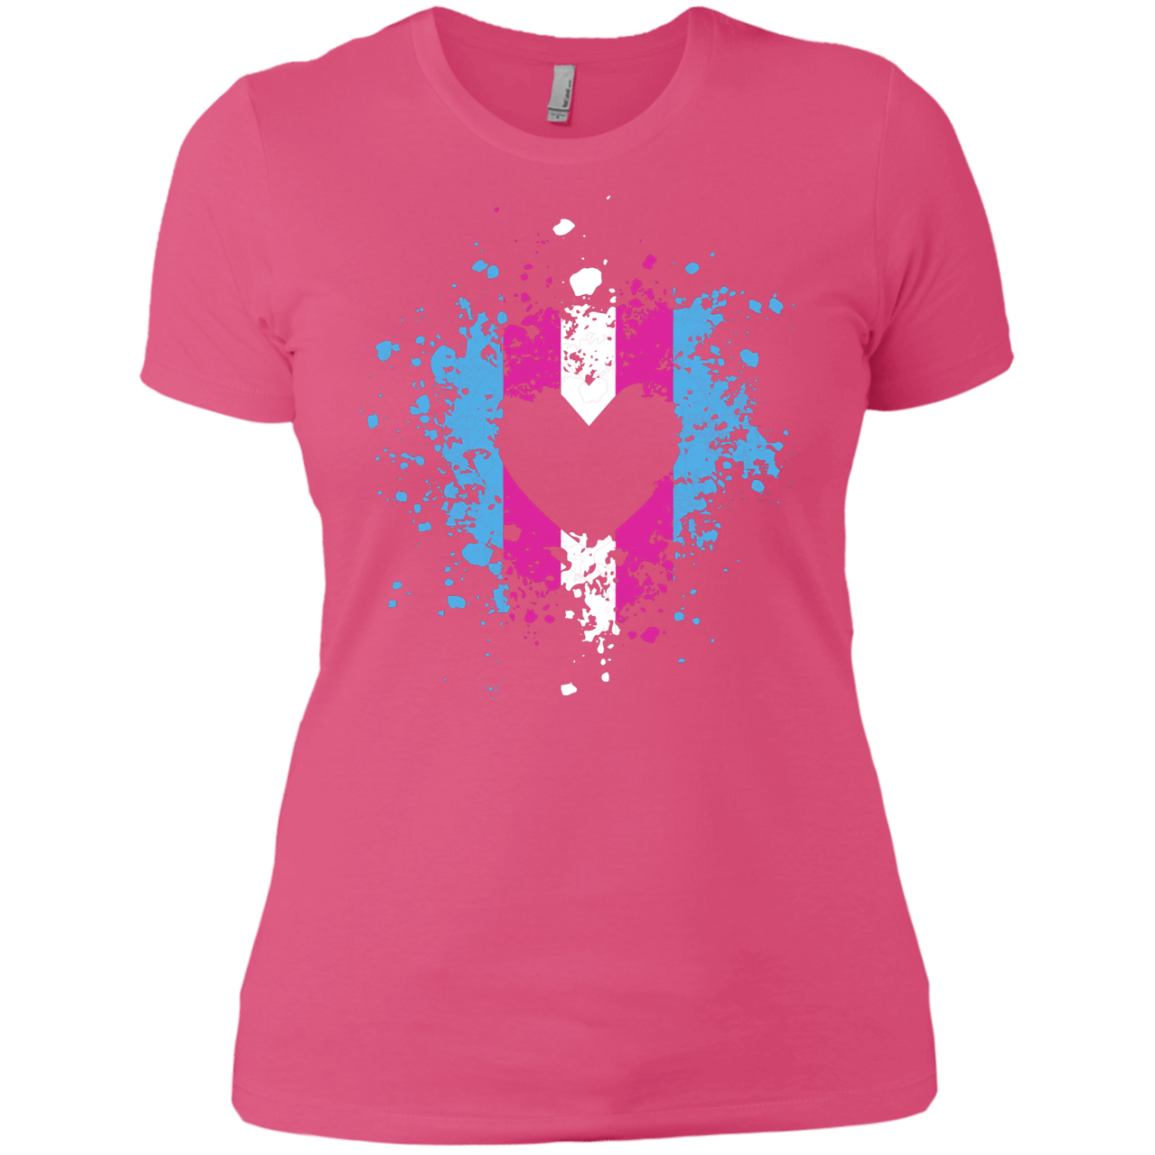 Trans Heart Pride Pink Shirt for womens trans womens apparel 